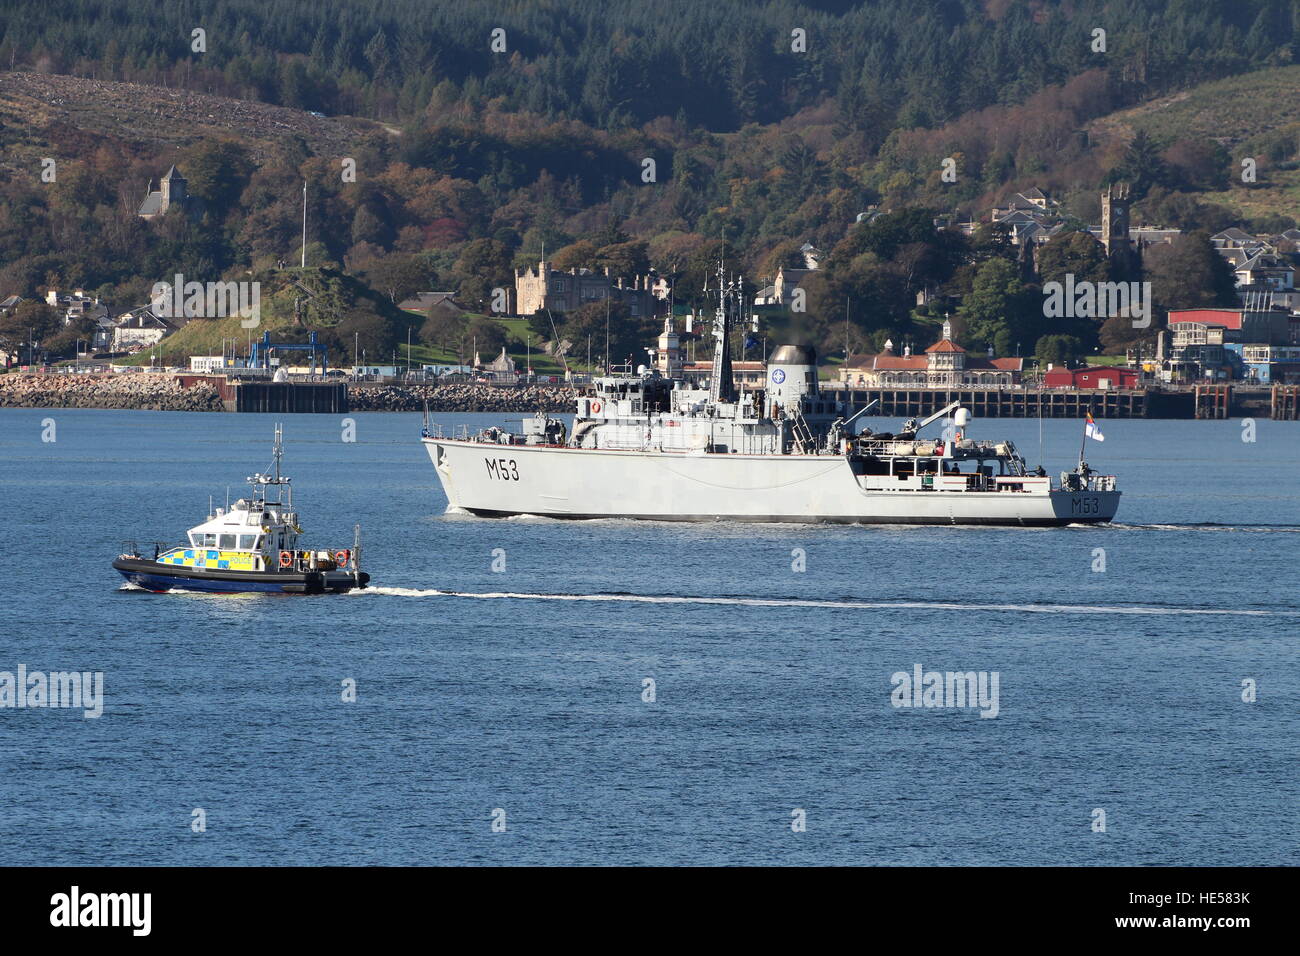 LNS Skalvis (M53), a Hunt-class minehunter of the Lithuanian Navy, and Harris, an Island-class launch of the MoD Police. Stock Photo